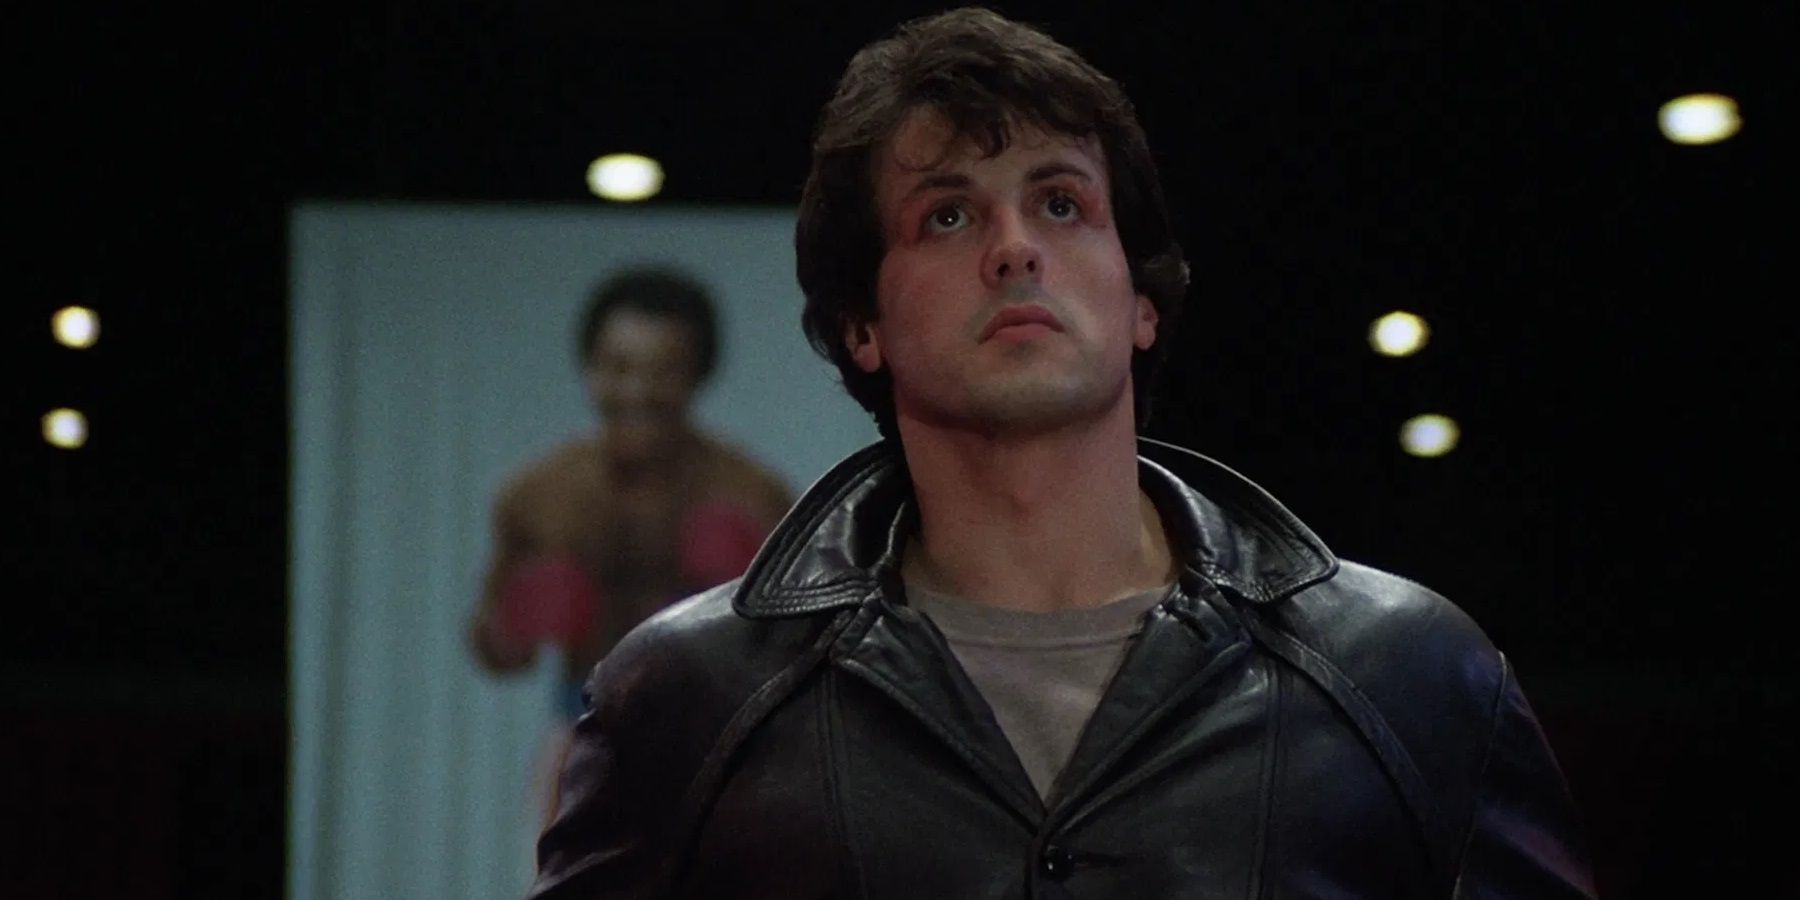 Sylvester Stallone as Rocky Balboa observing contemplating the boxing arena in Rocky